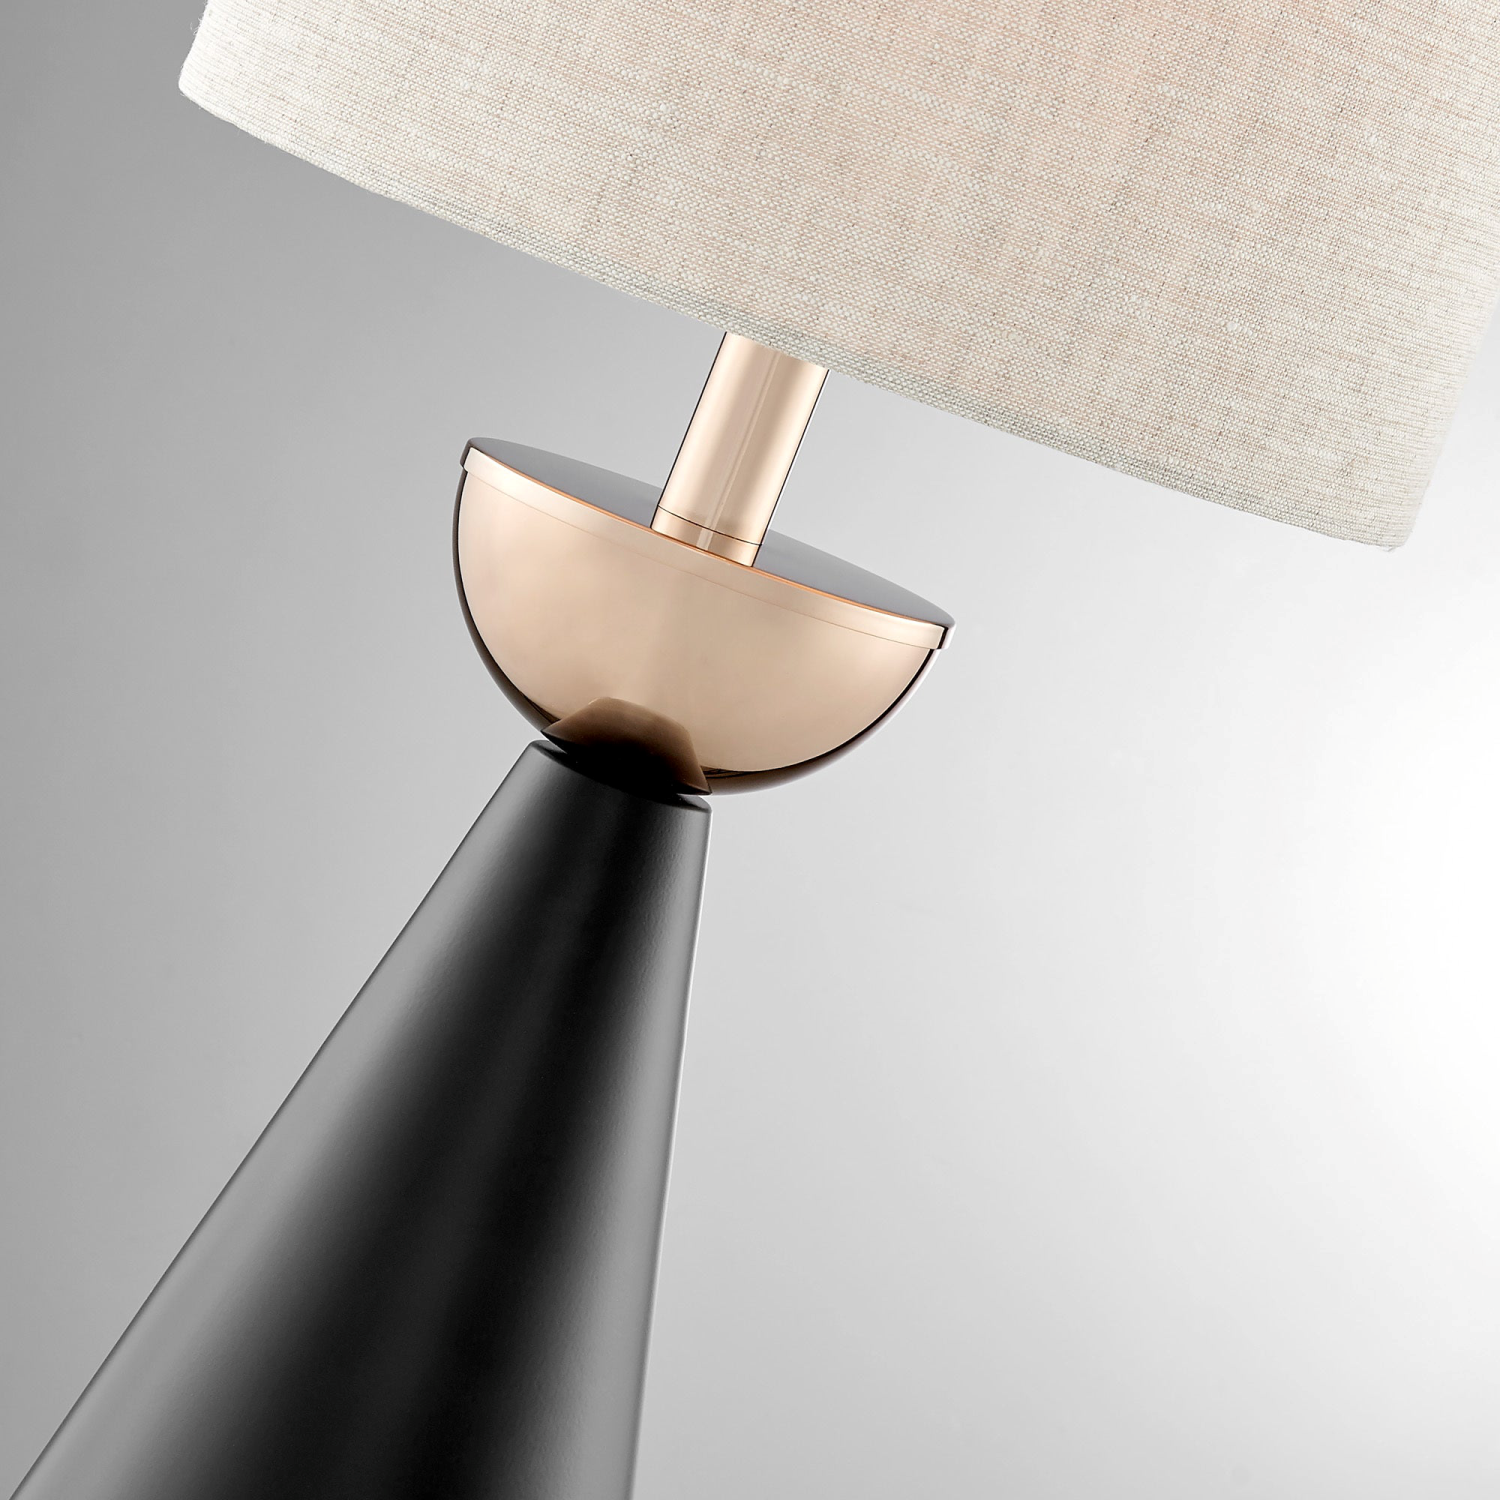 Oriela Table Lamp Close Up of Lamp Neck with Gold Accents